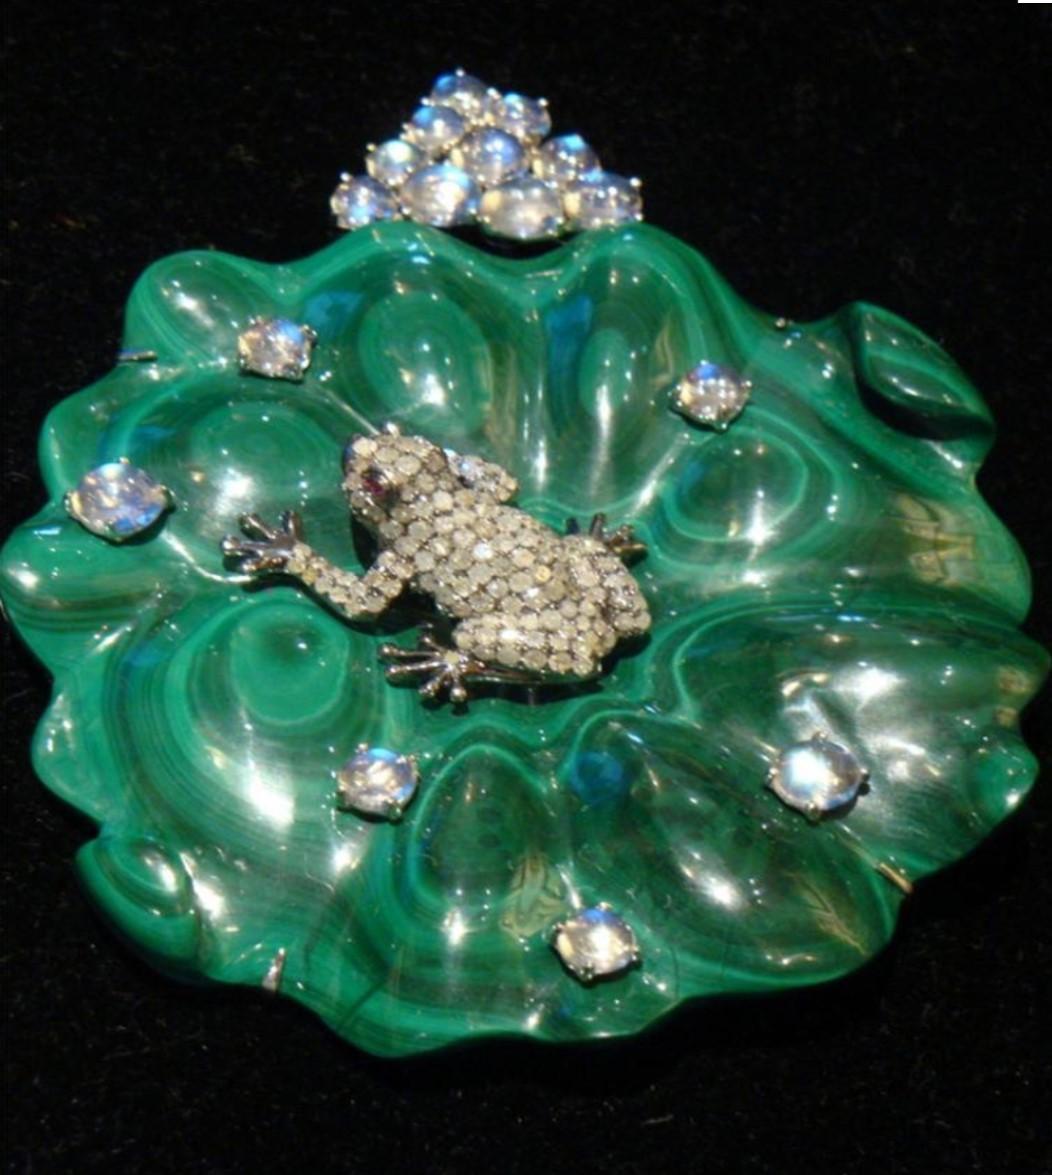 The Following Items we are offering is An Outstanding 18 Karat White Gold, Malachite, Diamond, Moonstone and Ruby Water Lily Pendant/Objet, consisting of a carved fluted malachite plaque in a lily pad motif surmounted with a central black rhodium